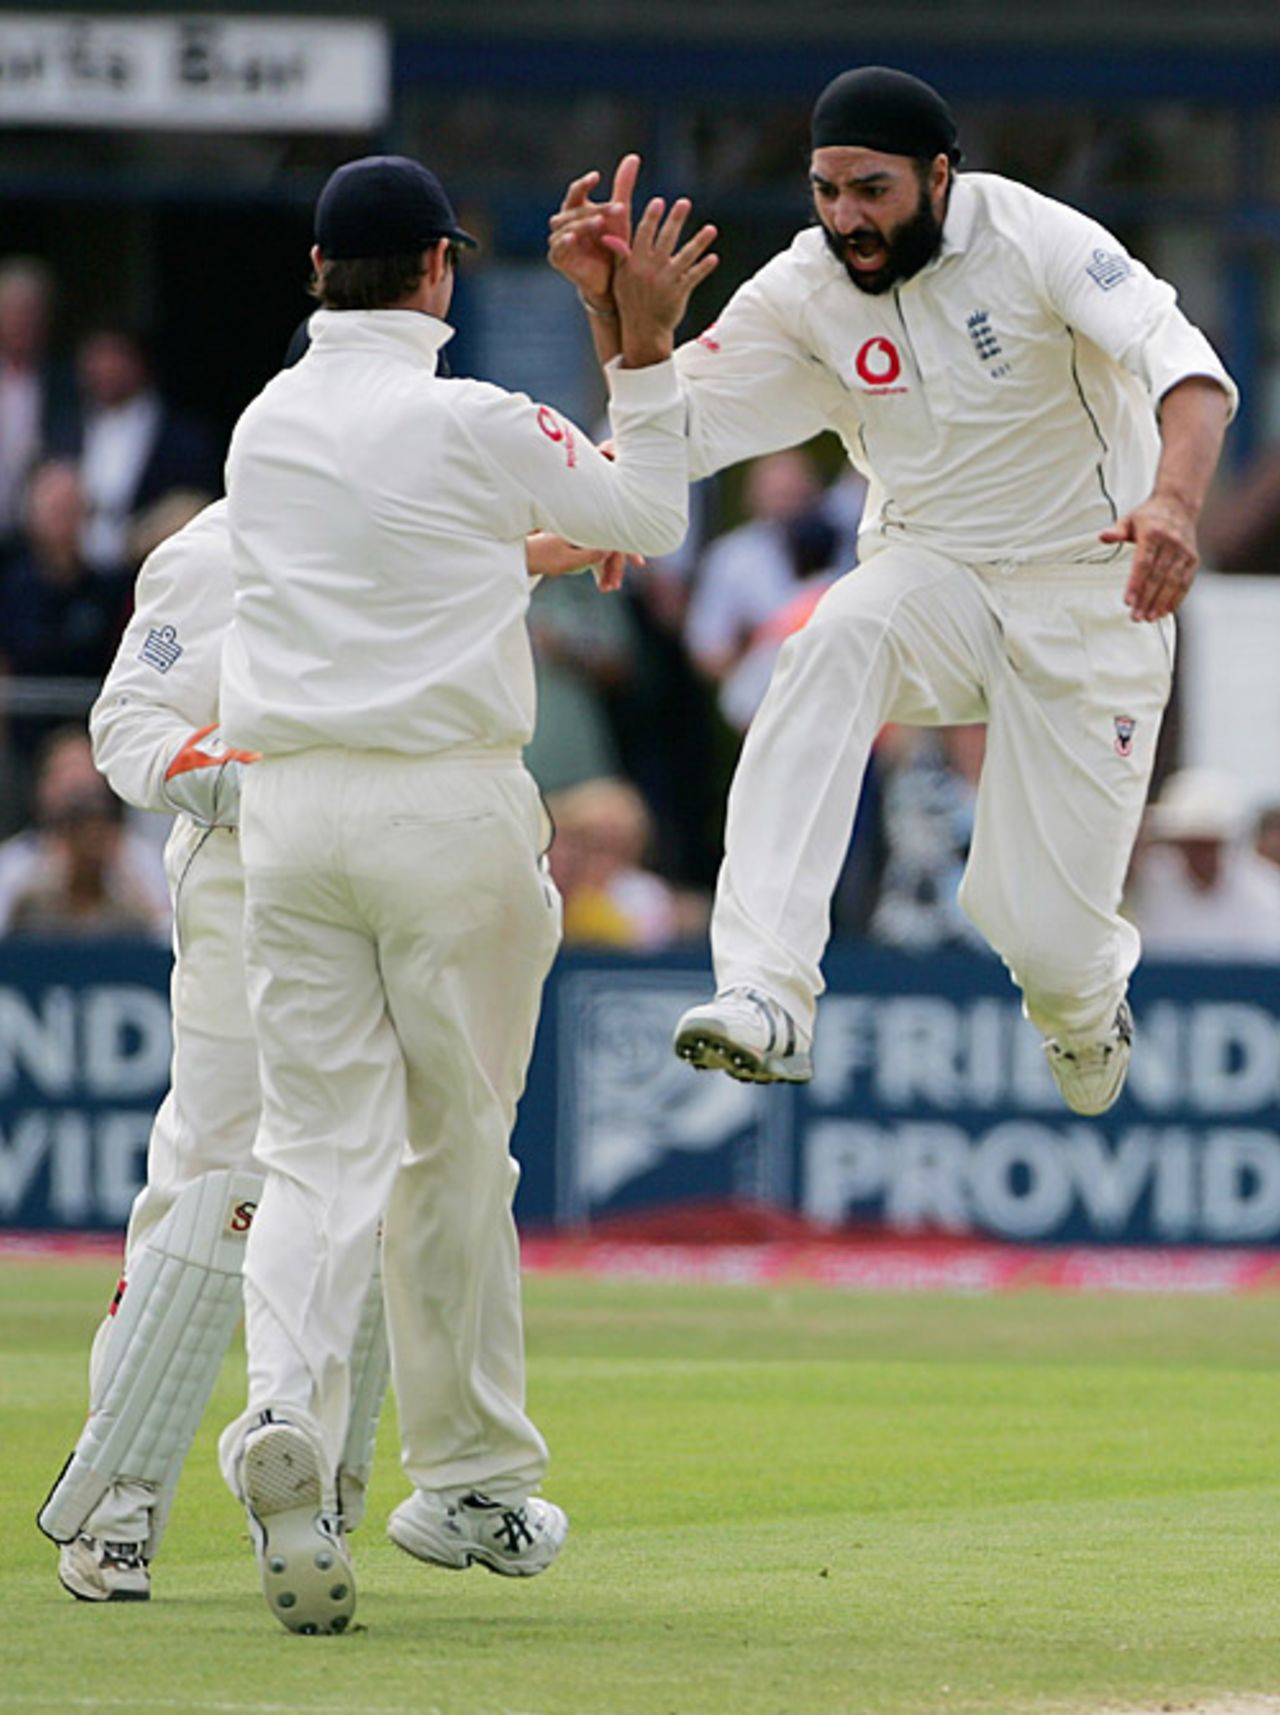 Monty Panesar jumps in delight after removing Taufeeq Umar, England v Pakistan, 3rd Test, Headingley, August 8, 2006